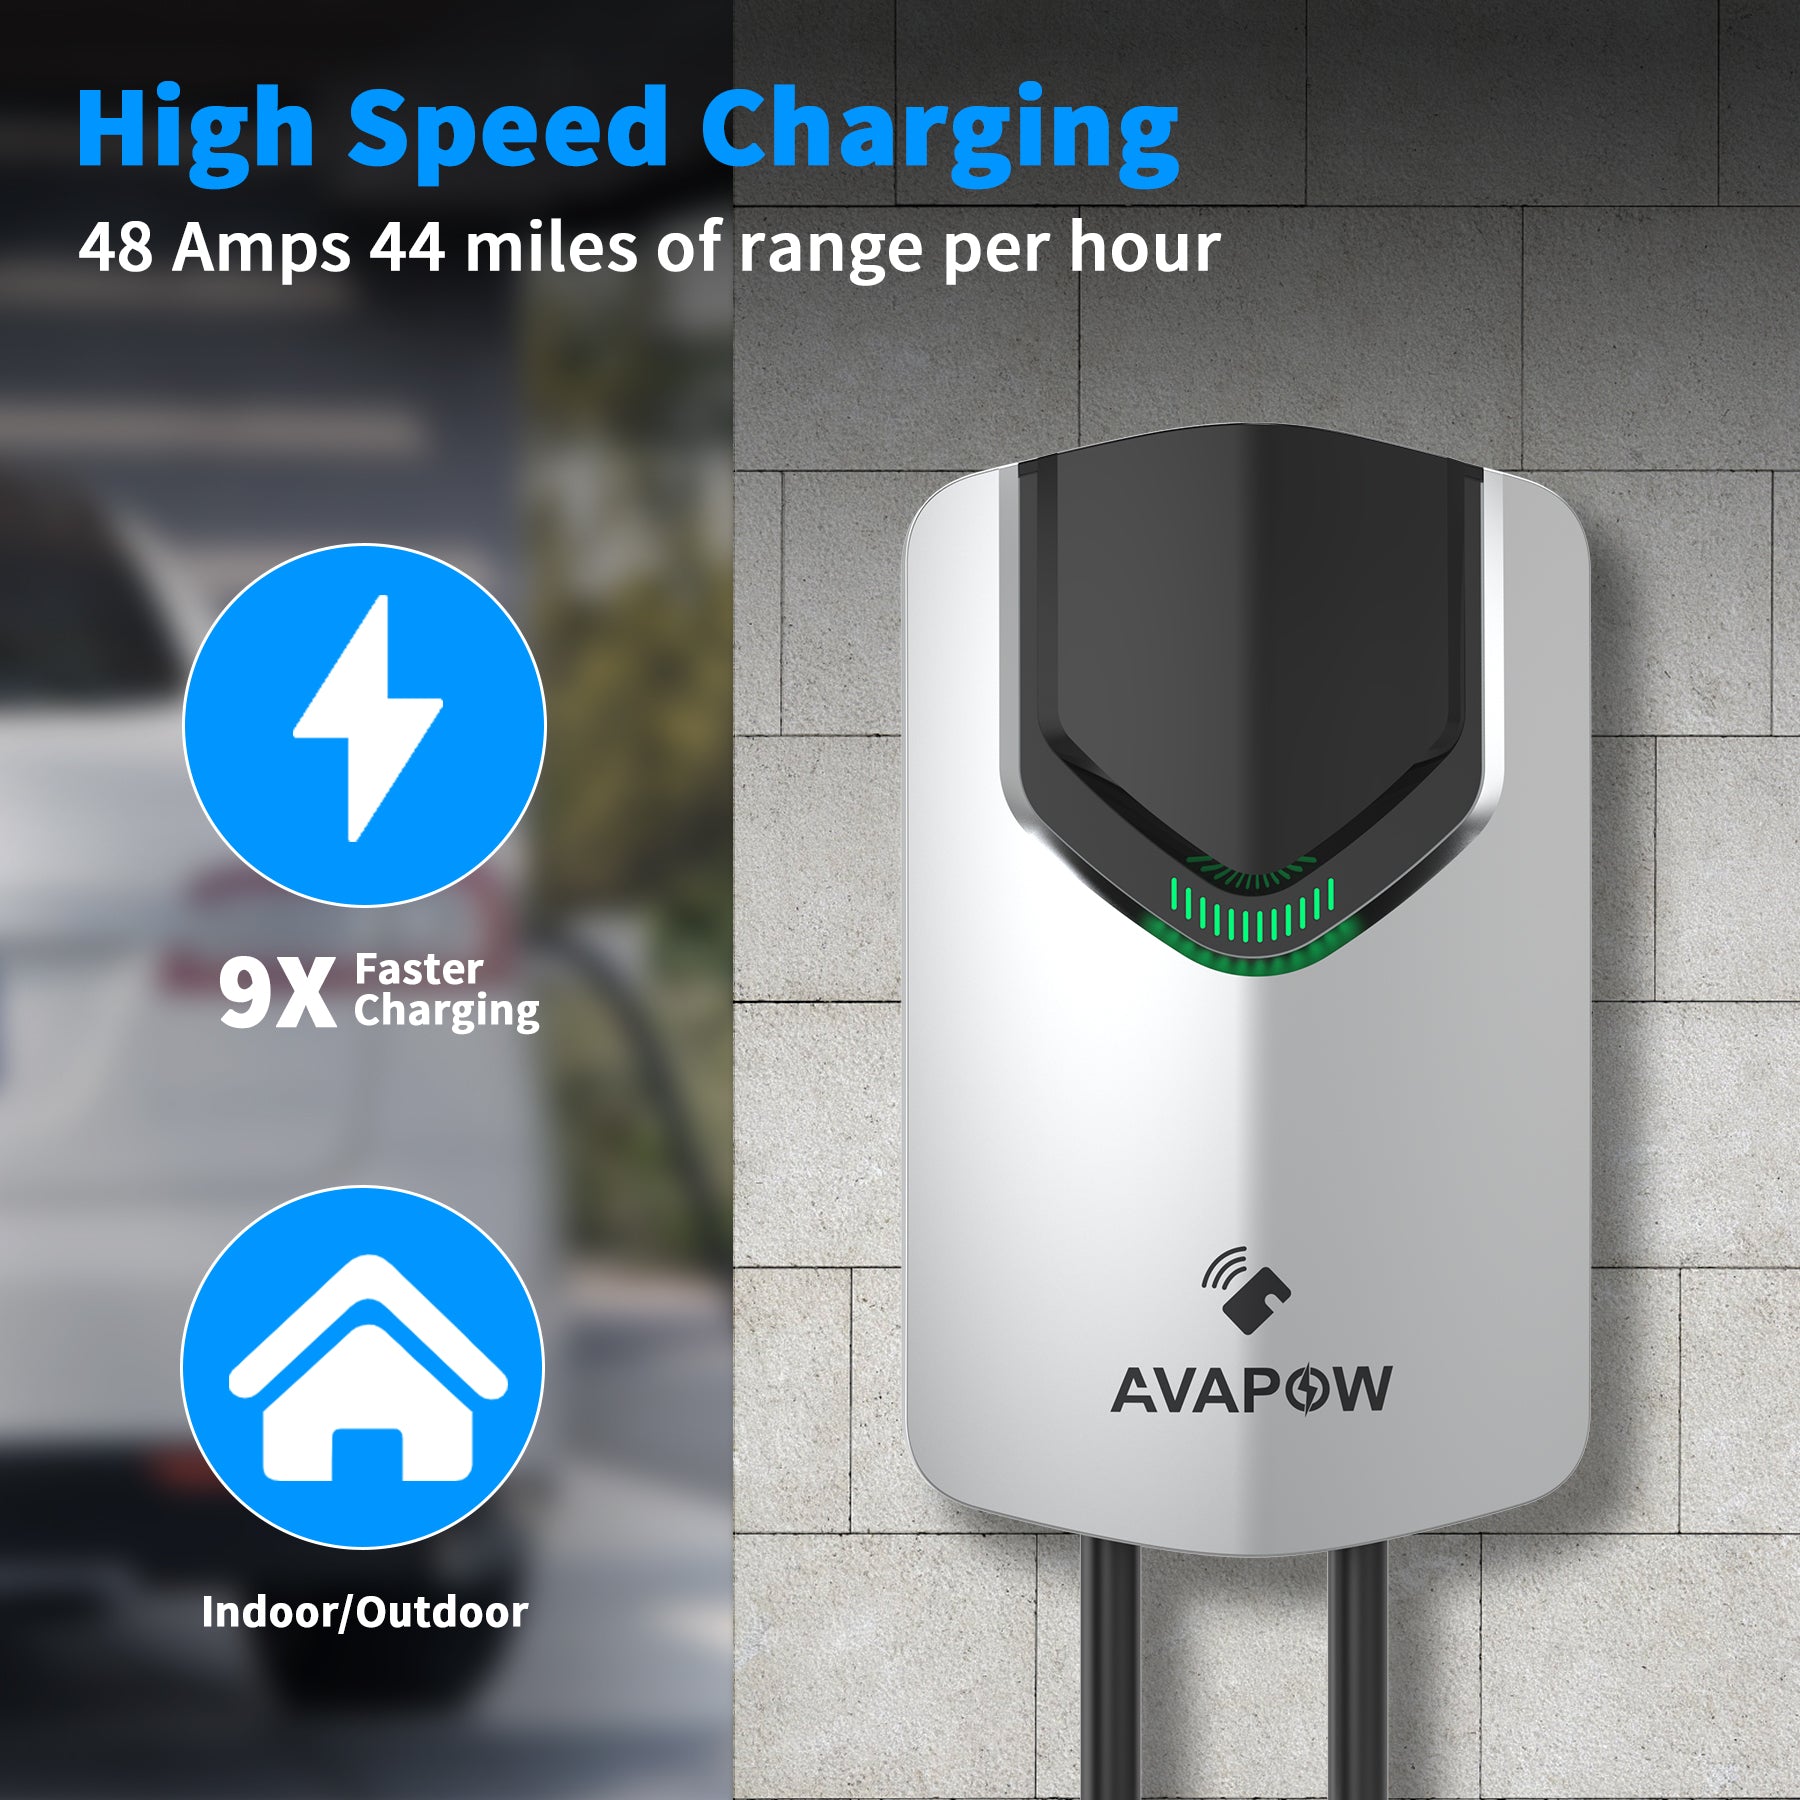 AVAPOW EV Charger (for J1772 EVs) 48A 240V Electric Car Home Charging Stations with Holder, WiFi/Card Swipe Enabled Level 2 EV Charger with 25FT EV Charging Cable and NEMA 14-50 Charger Plug